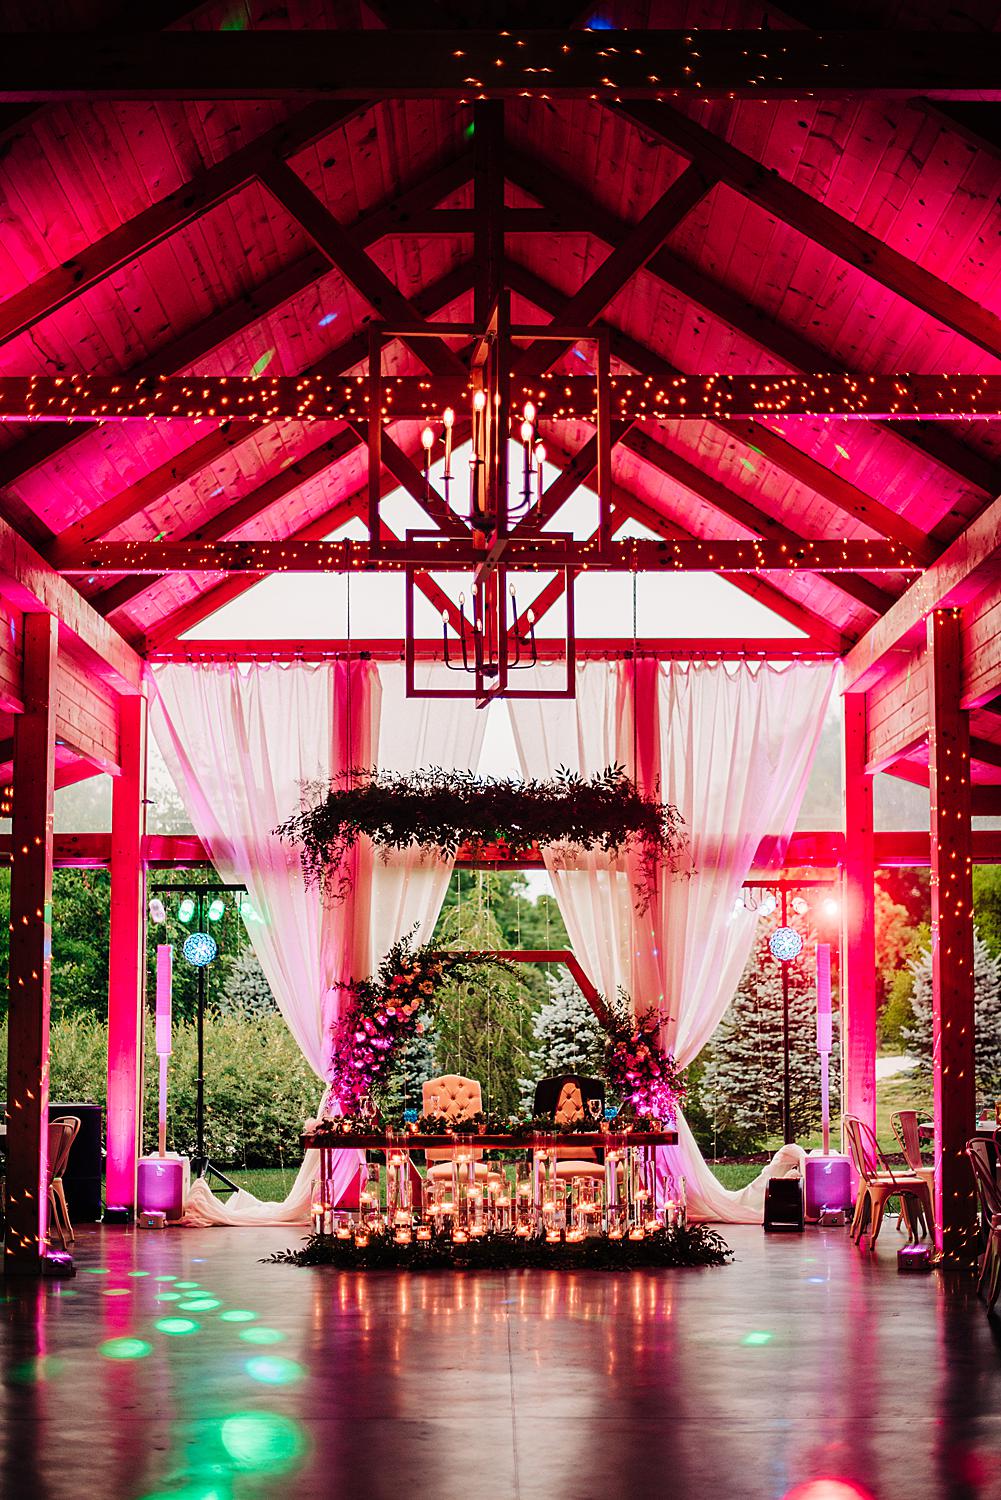 Flora and Field wedding reception space with dramatic pink uplighting